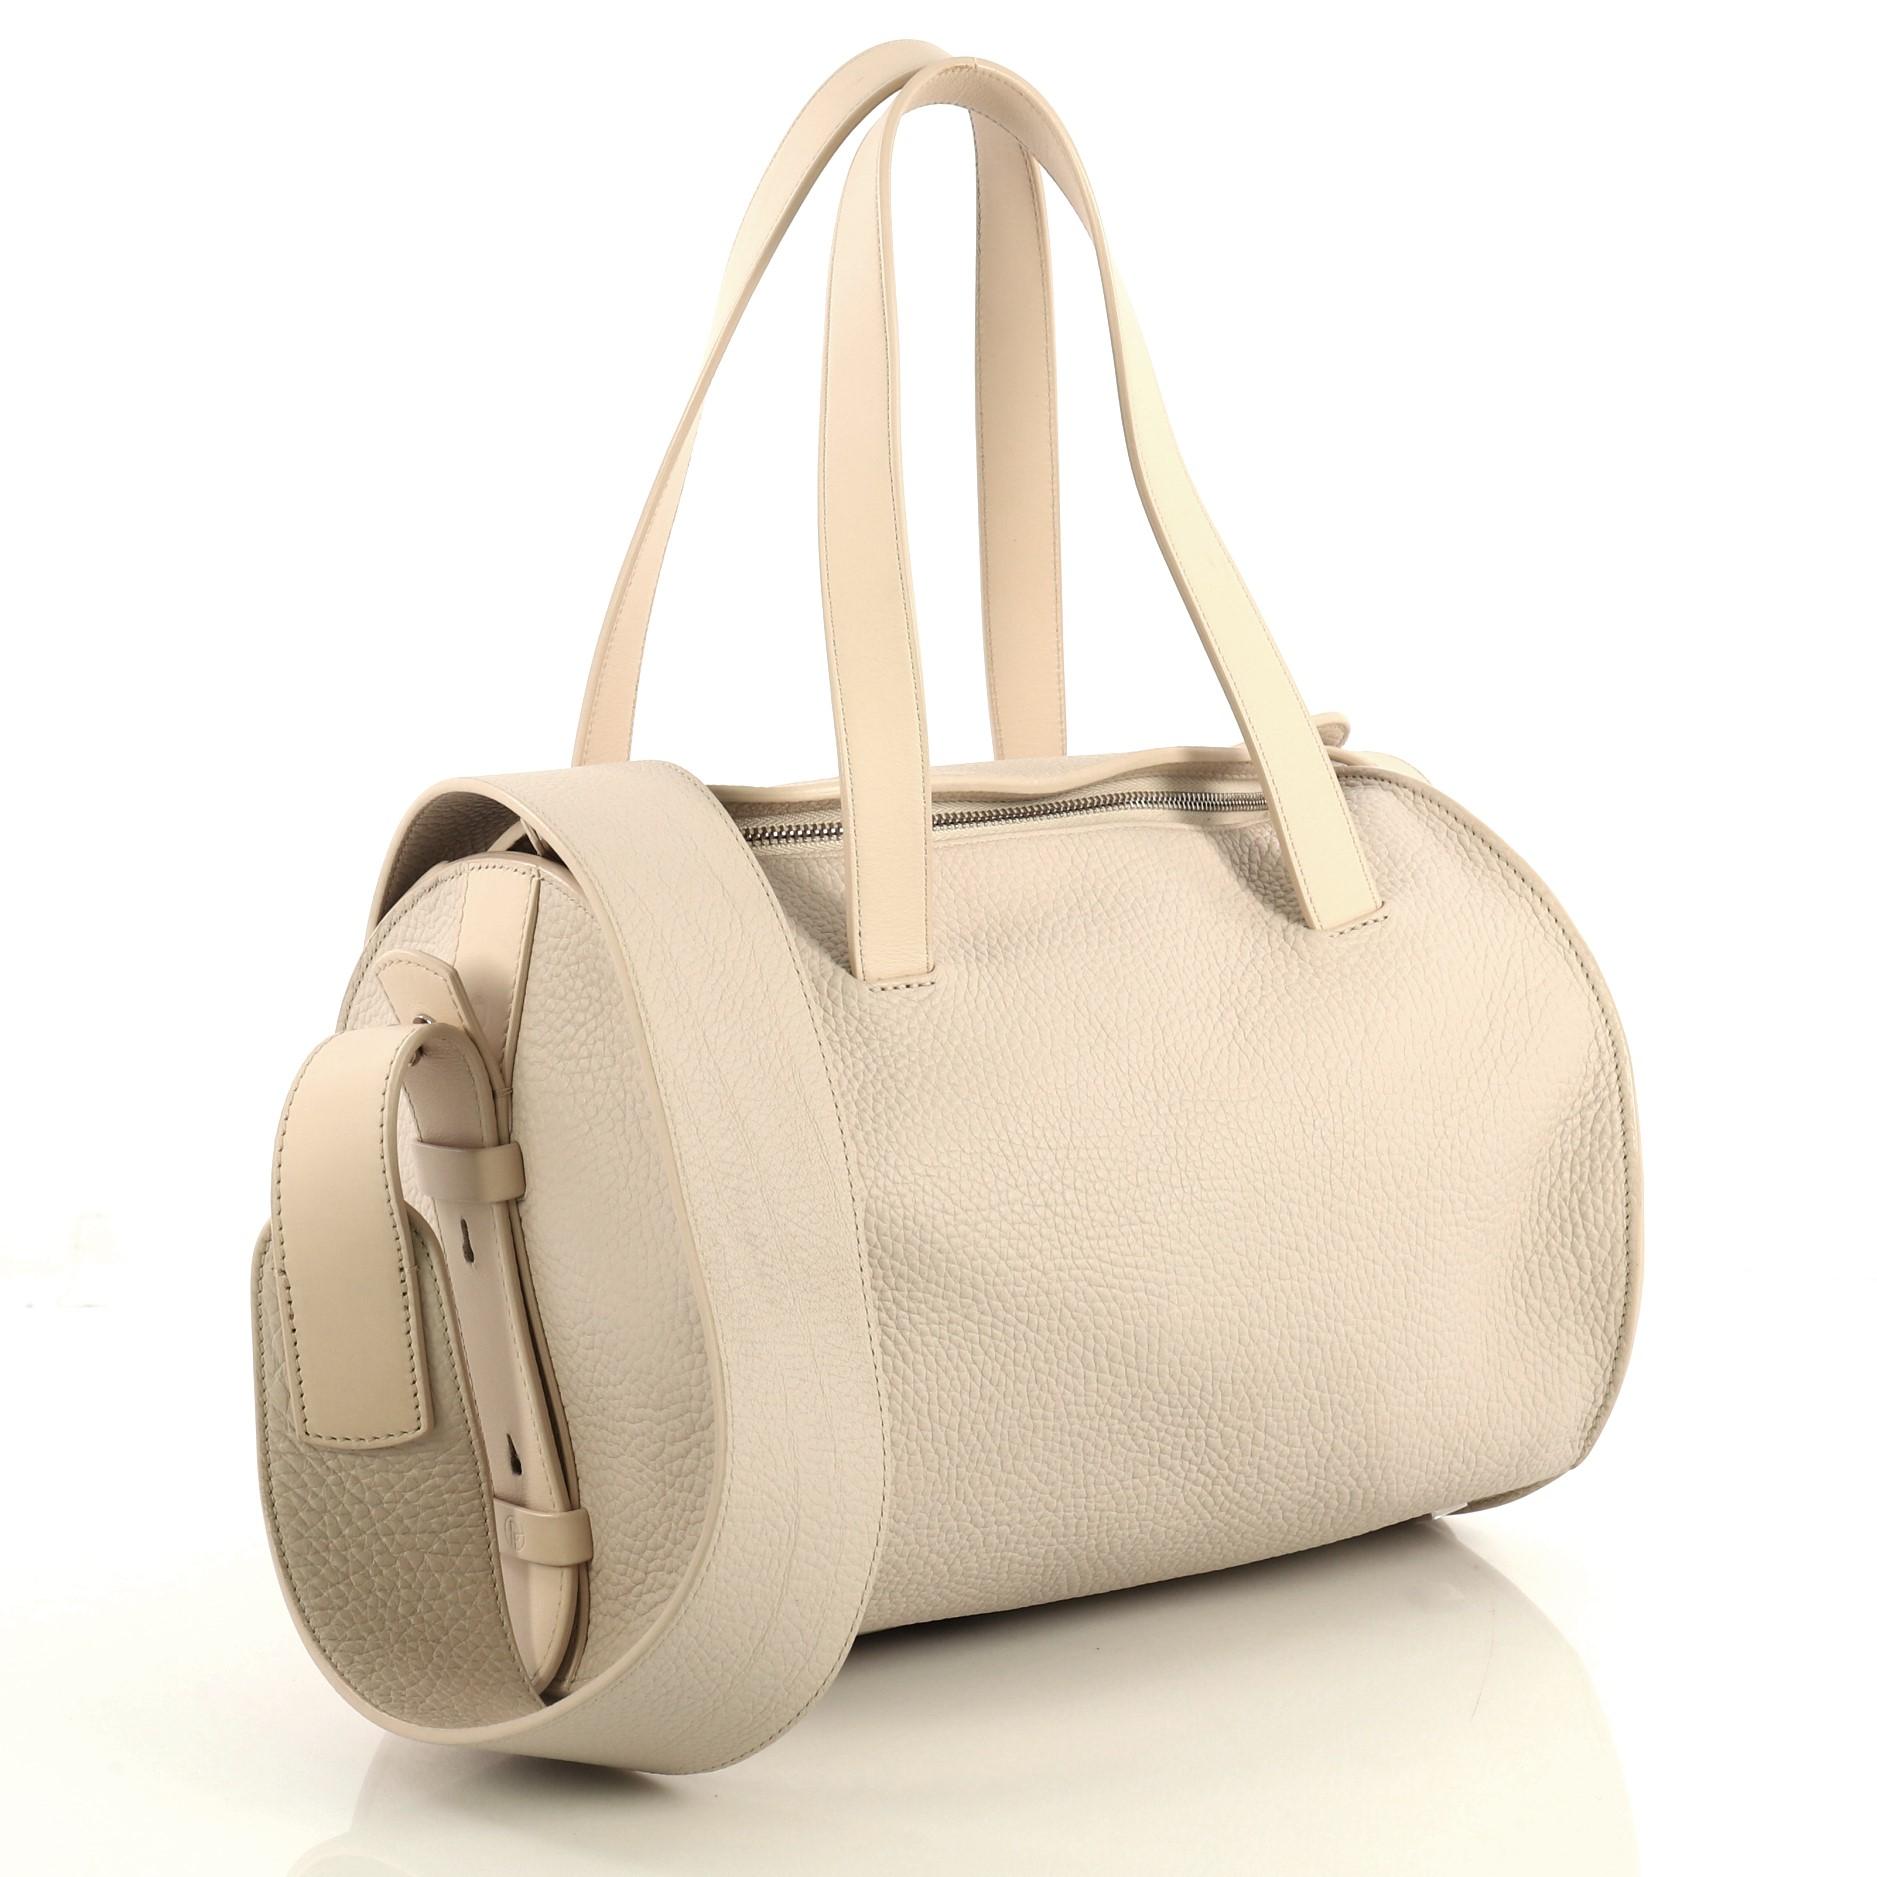 This The Row Drum Shoulder Bag Leather 10, crafted from neutral leather, features dual flat handles, protective base studs, and silver-tone hardware. Its zip closure opens to a neutral fabric interior with zip and slip pockets. 

Estimated Retail